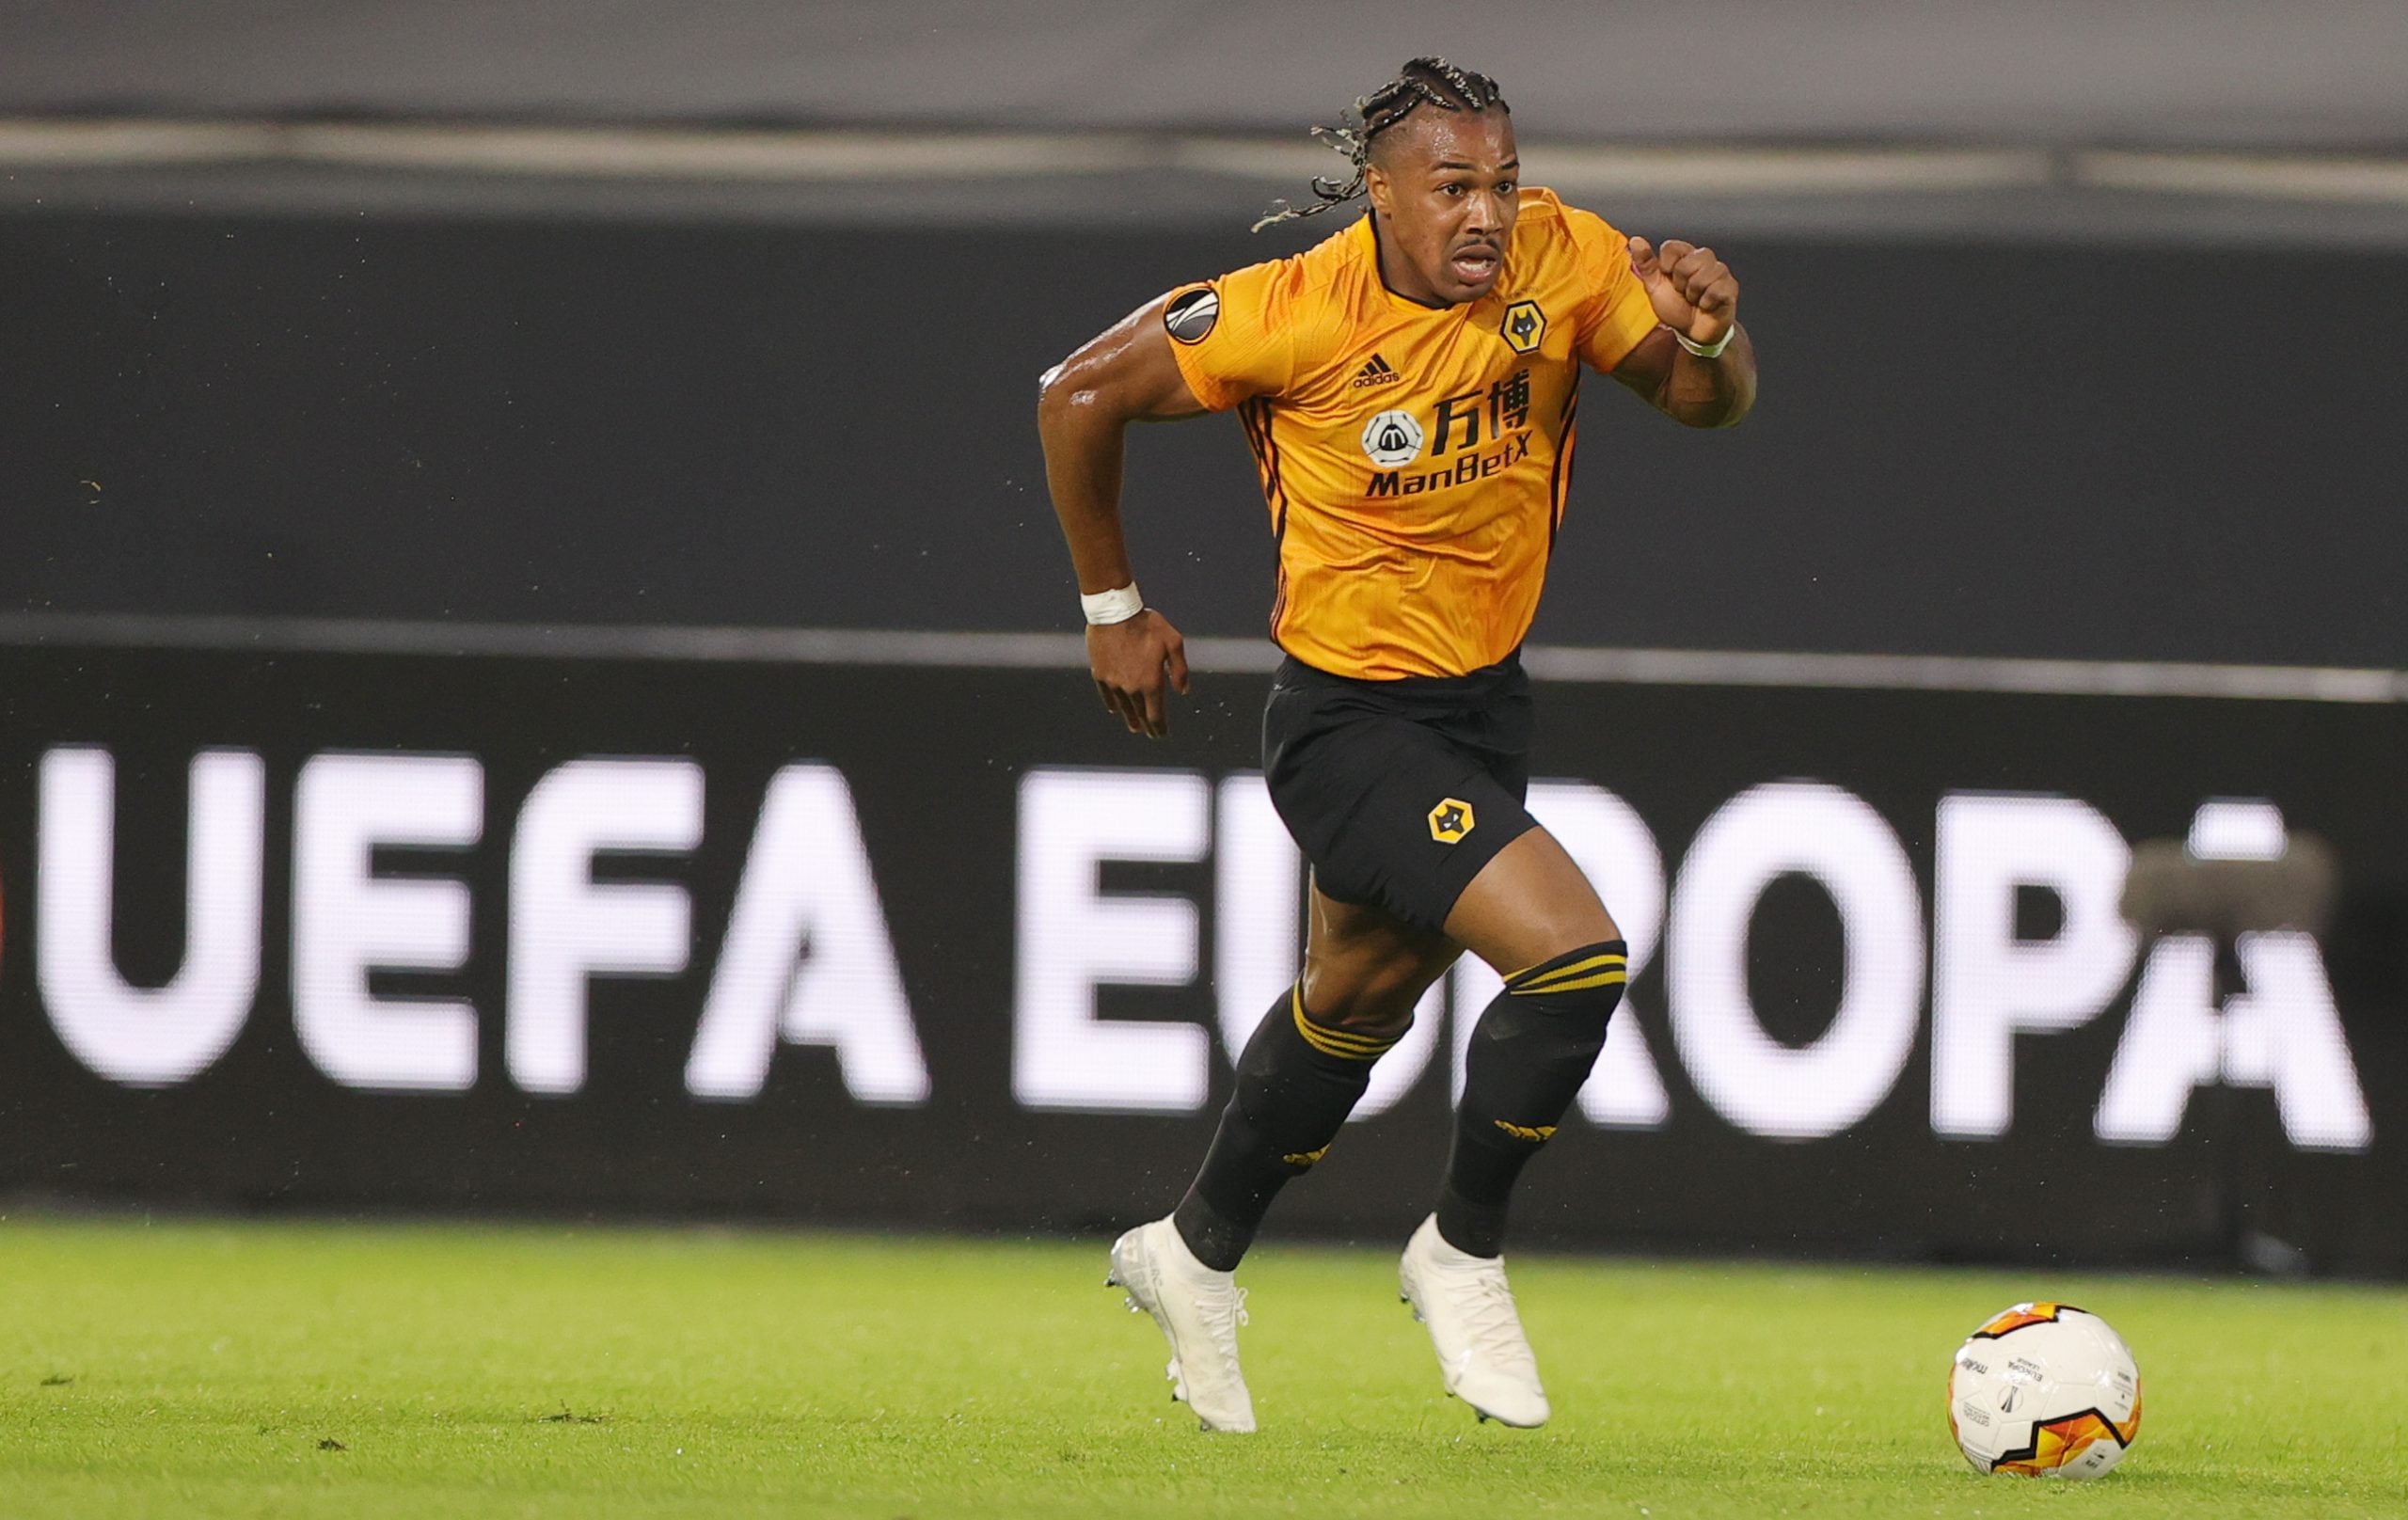 4-2-3-1 Wolves Predicted Lineup Vs Manchester United (Wolves' Adama Traore is in action in the photo)